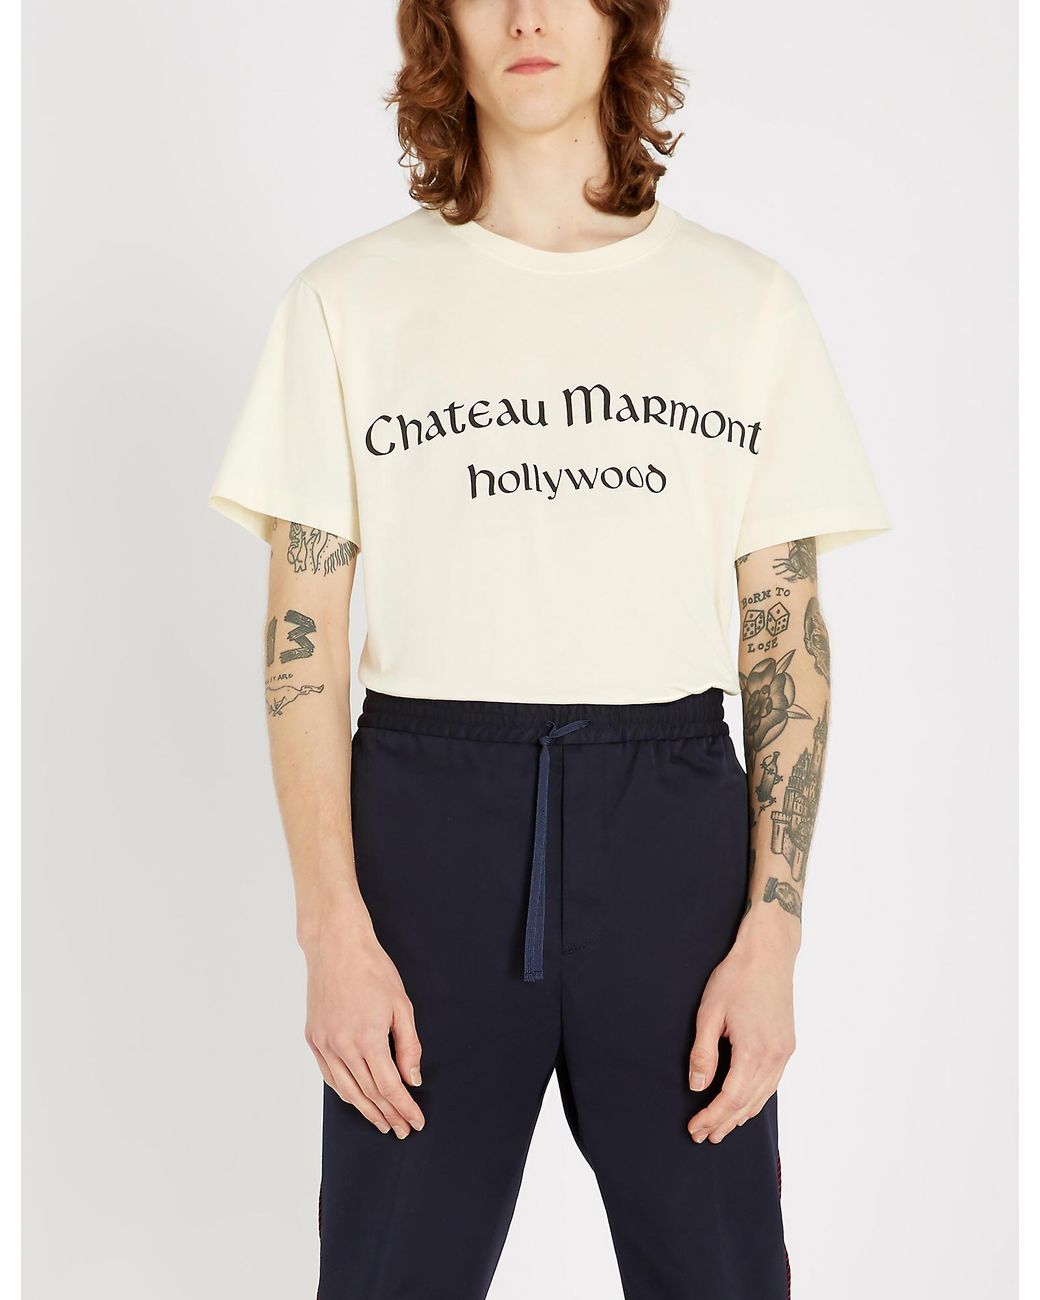 Gucci Chateau Marmont Hollywood Cotton-jersey T-shirt in White for Men |  Lyst